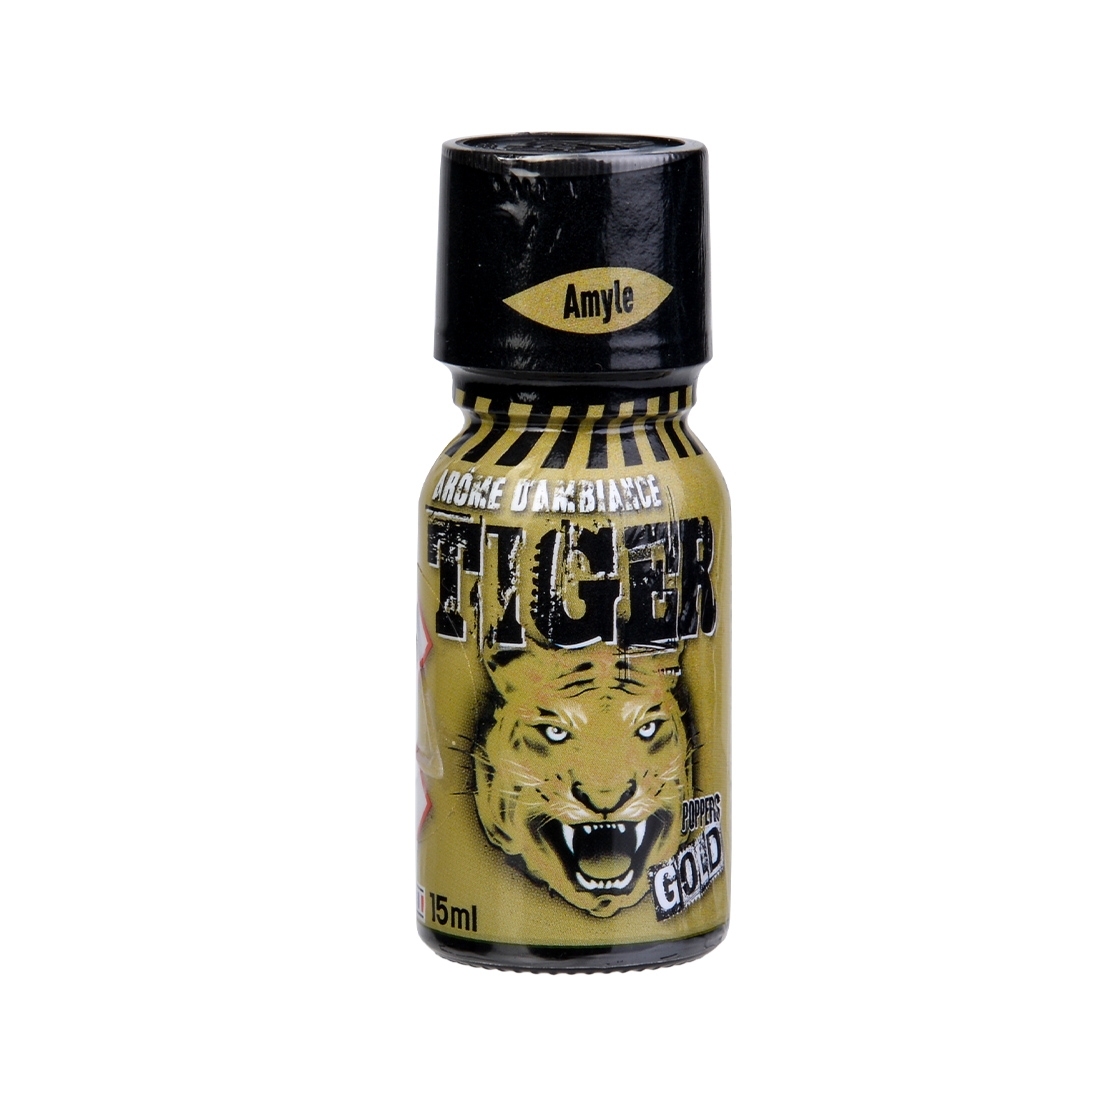 poppers tiger red